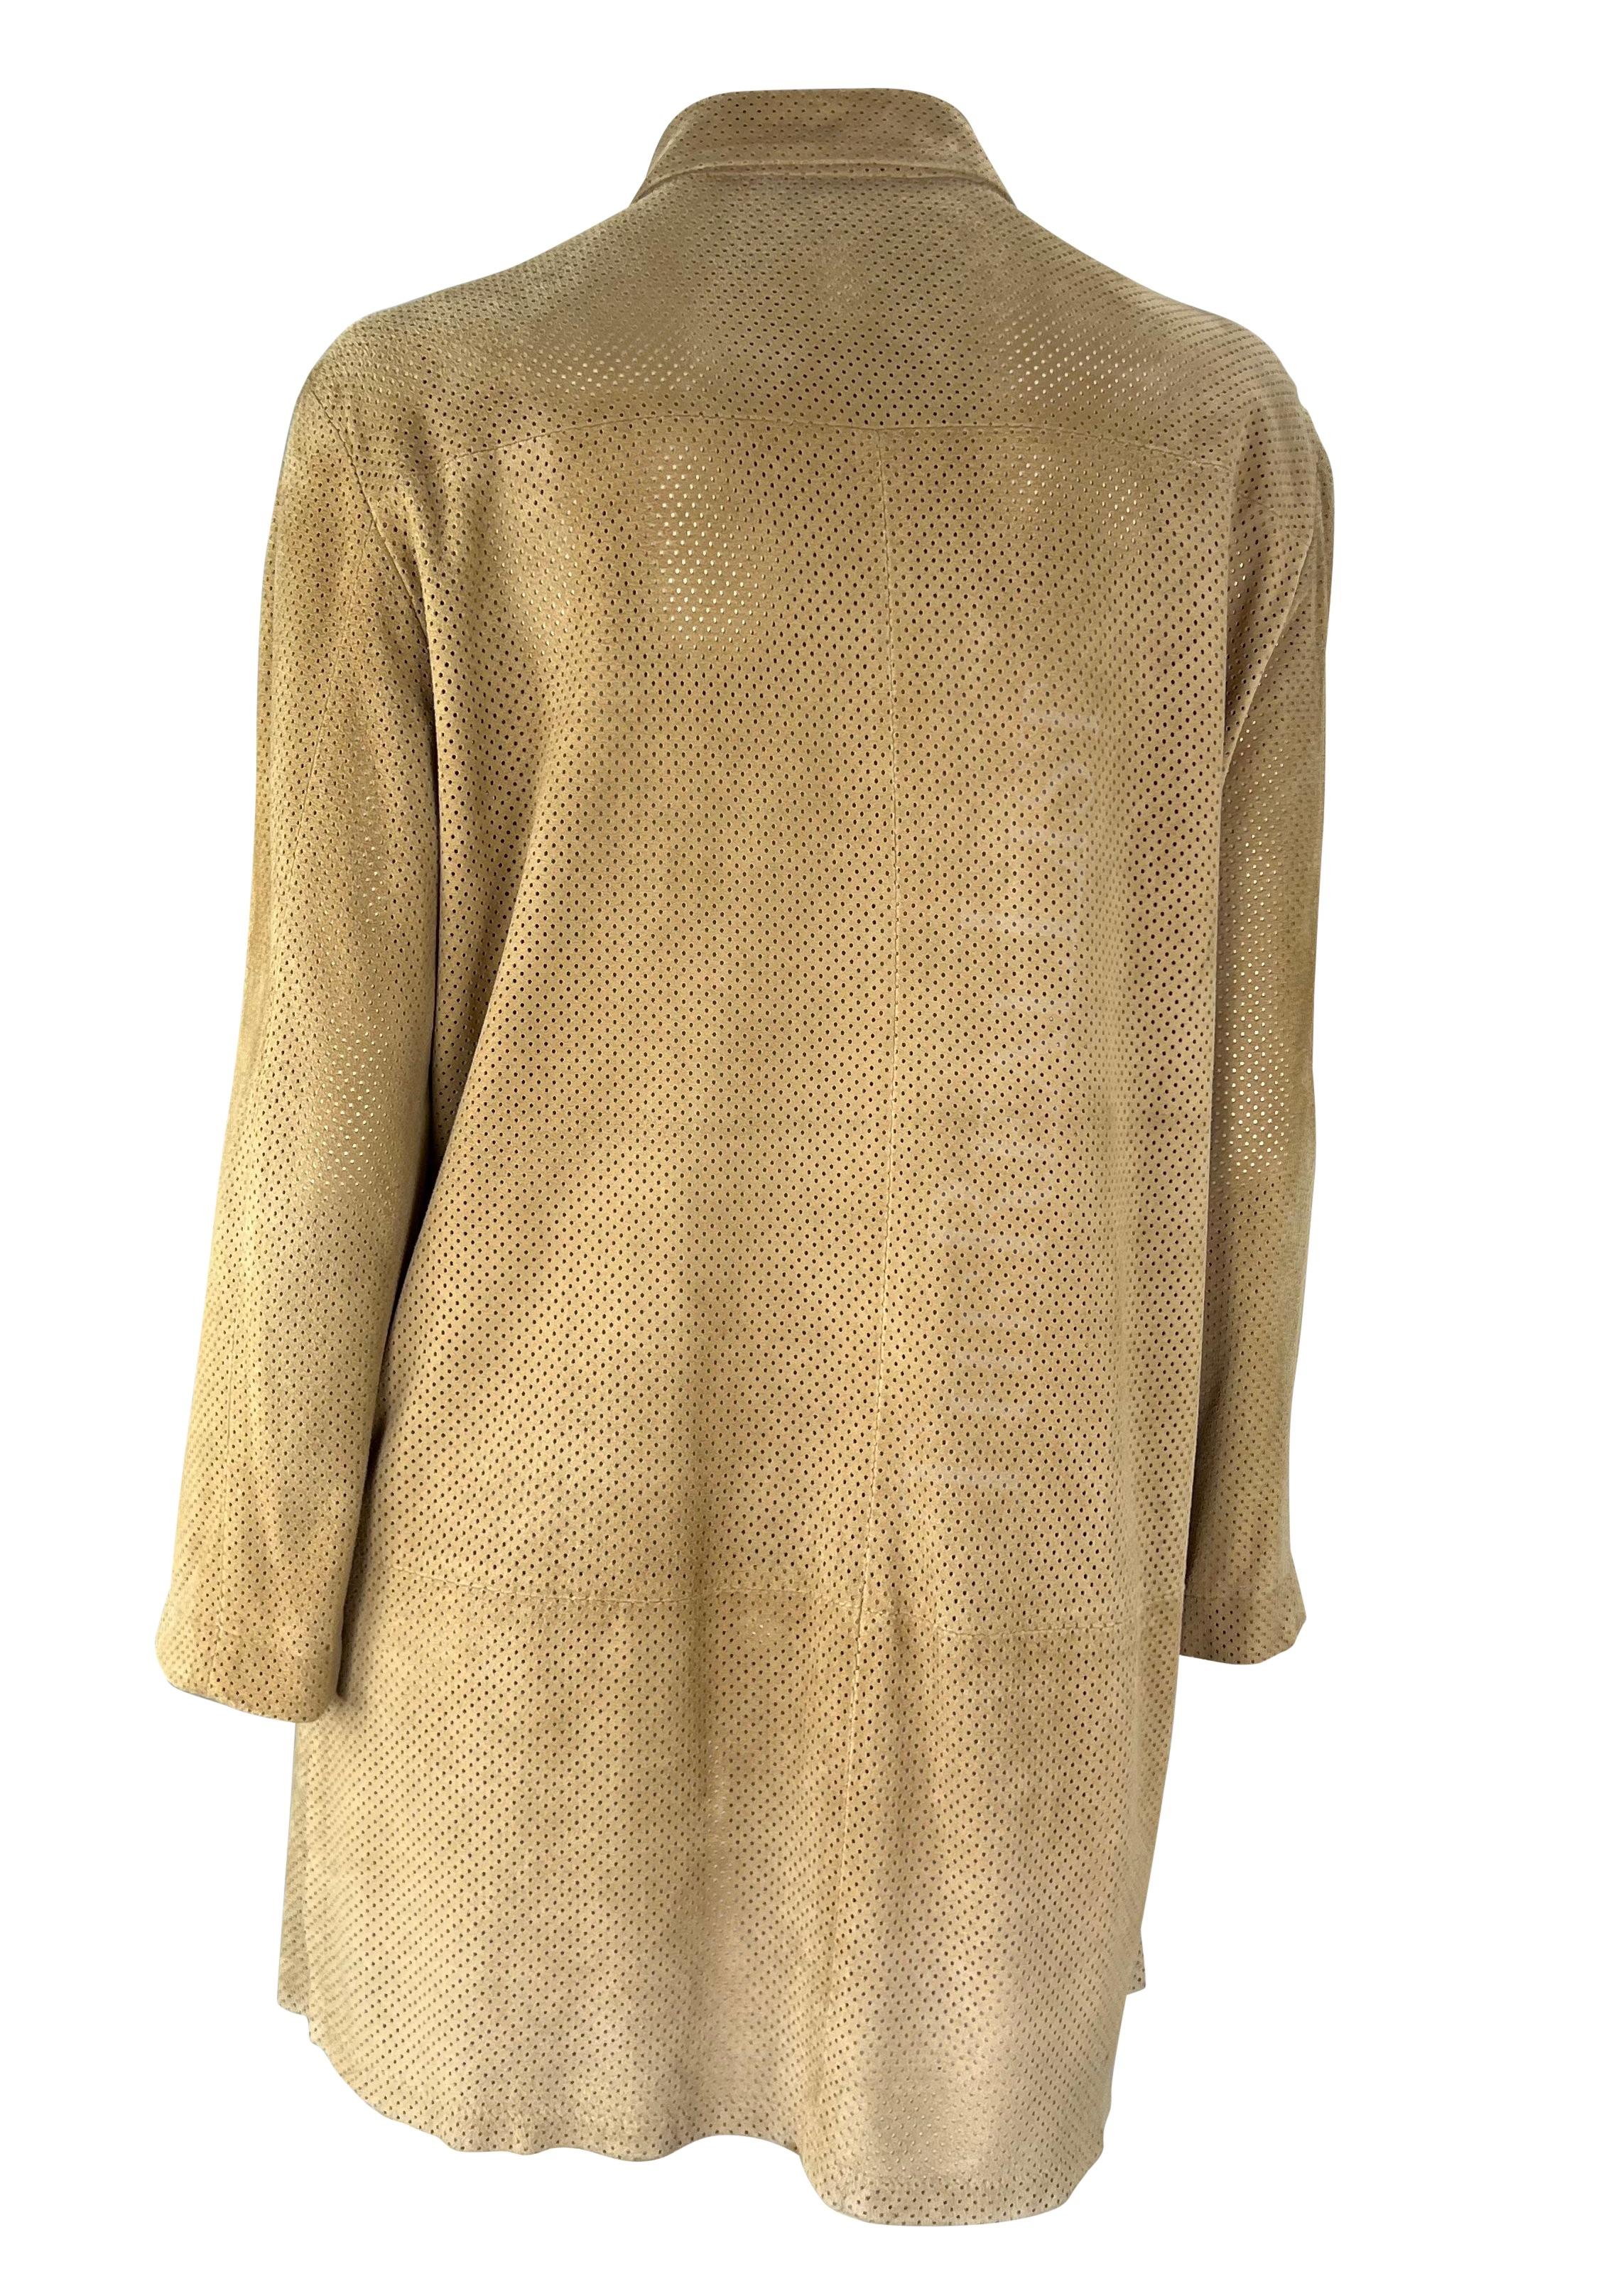 Women's S/S 1997 Gucci by Tom Ford Tan Perforated Suede Open Collared Skirt Jacket